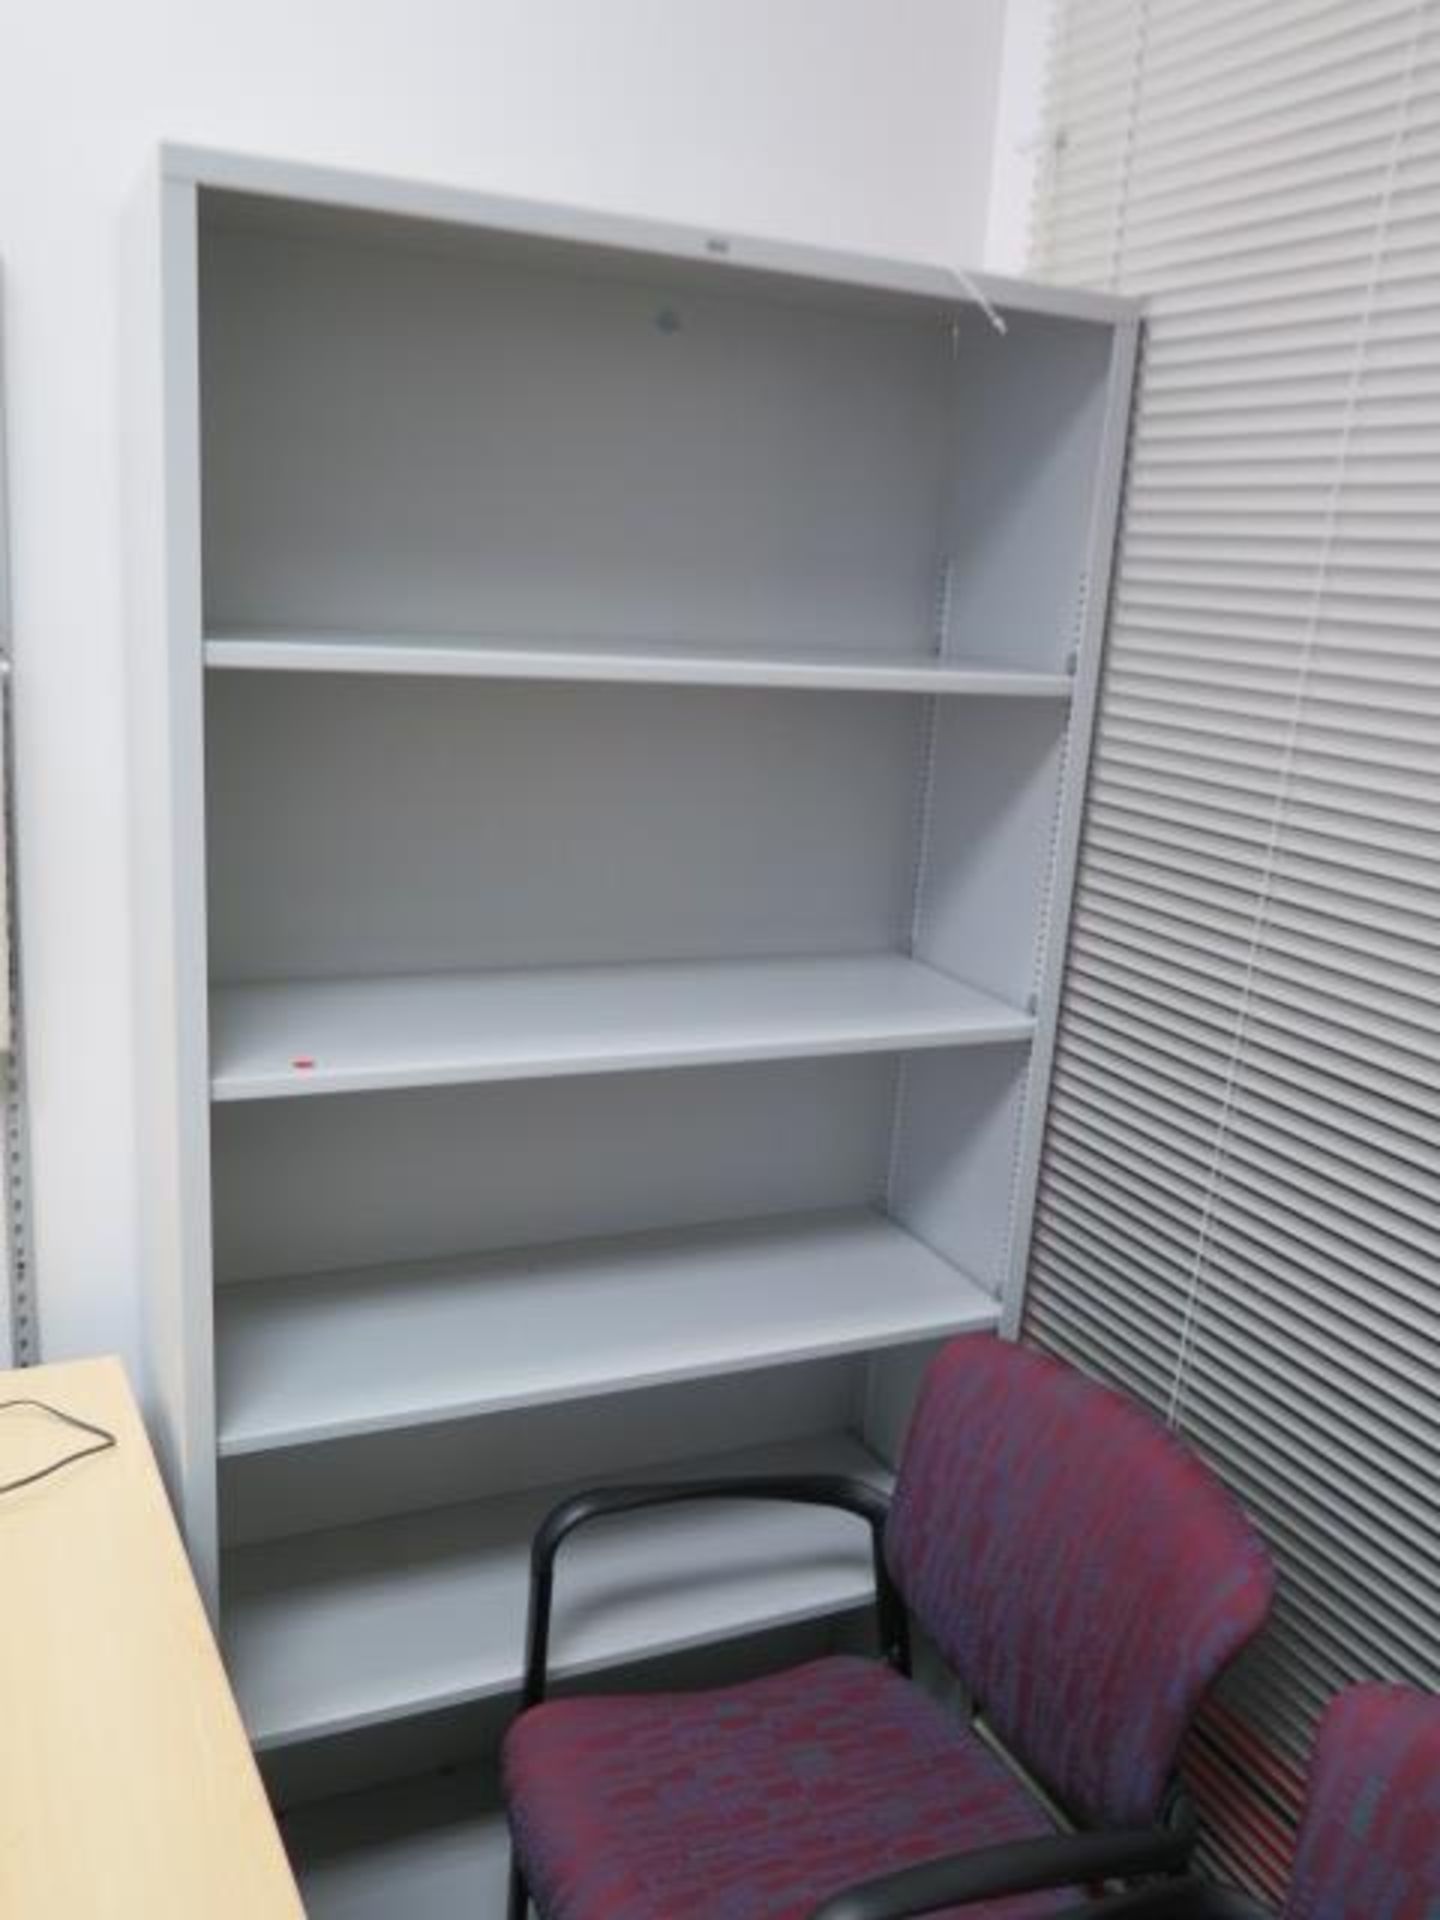 Desk, File Cabinet, and (2) Bookshelves (SOLD AS-IS - NO WARRANTY) - Image 6 of 8